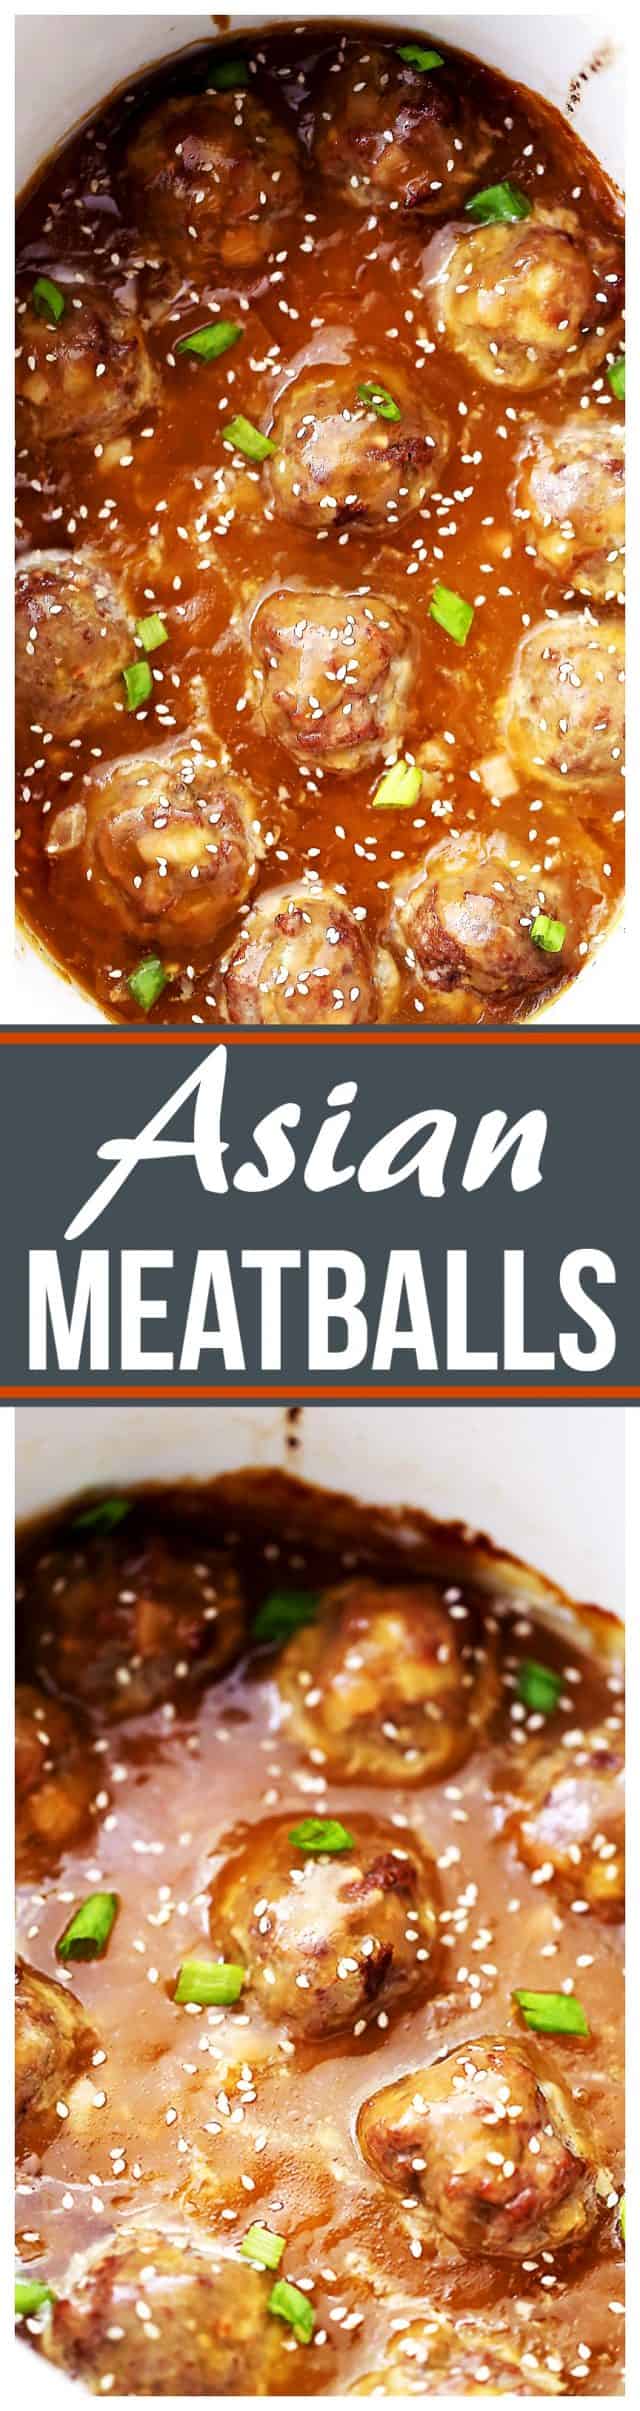 Crock Pot Asian Meatballs - Tender and juicy meatballs slow cooked in an amazing sweet and tangy pineapple-soy sauce. These are perfect for dinner, game days, or any and all celebrations! 